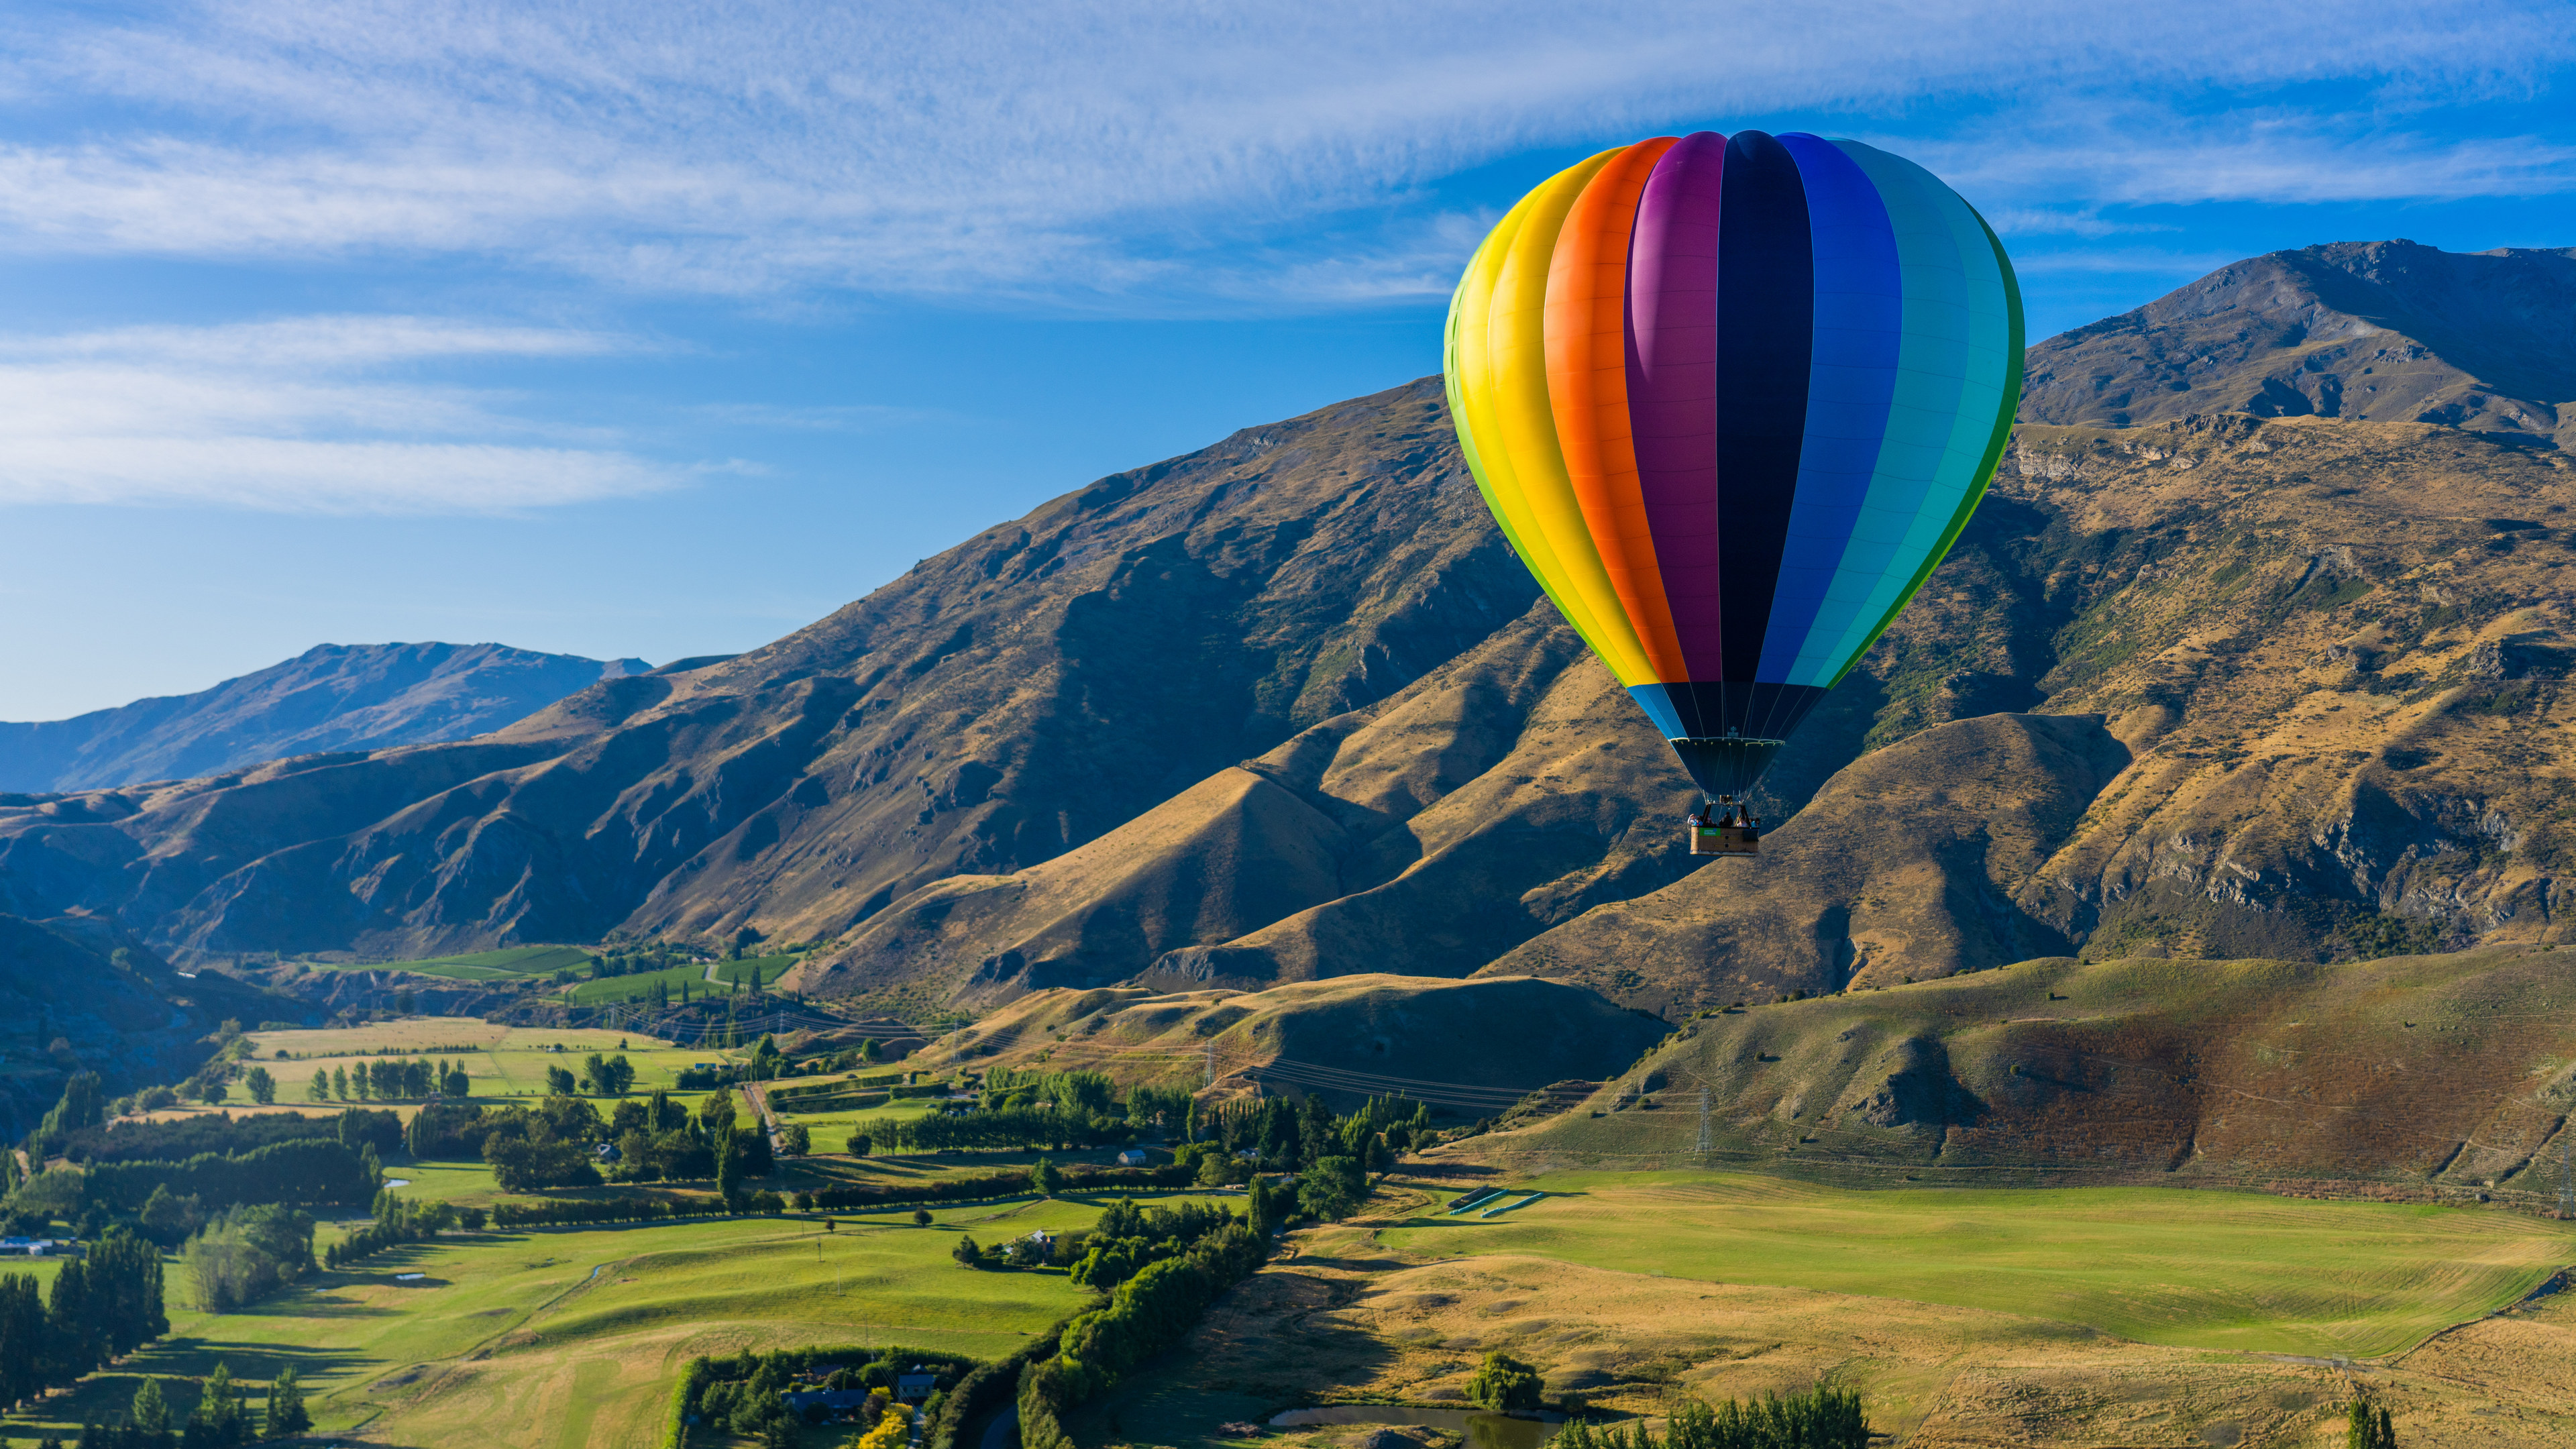 General 3840x2160 landscape 4K New Zealand nature hot air balloons mountains sky clouds trees